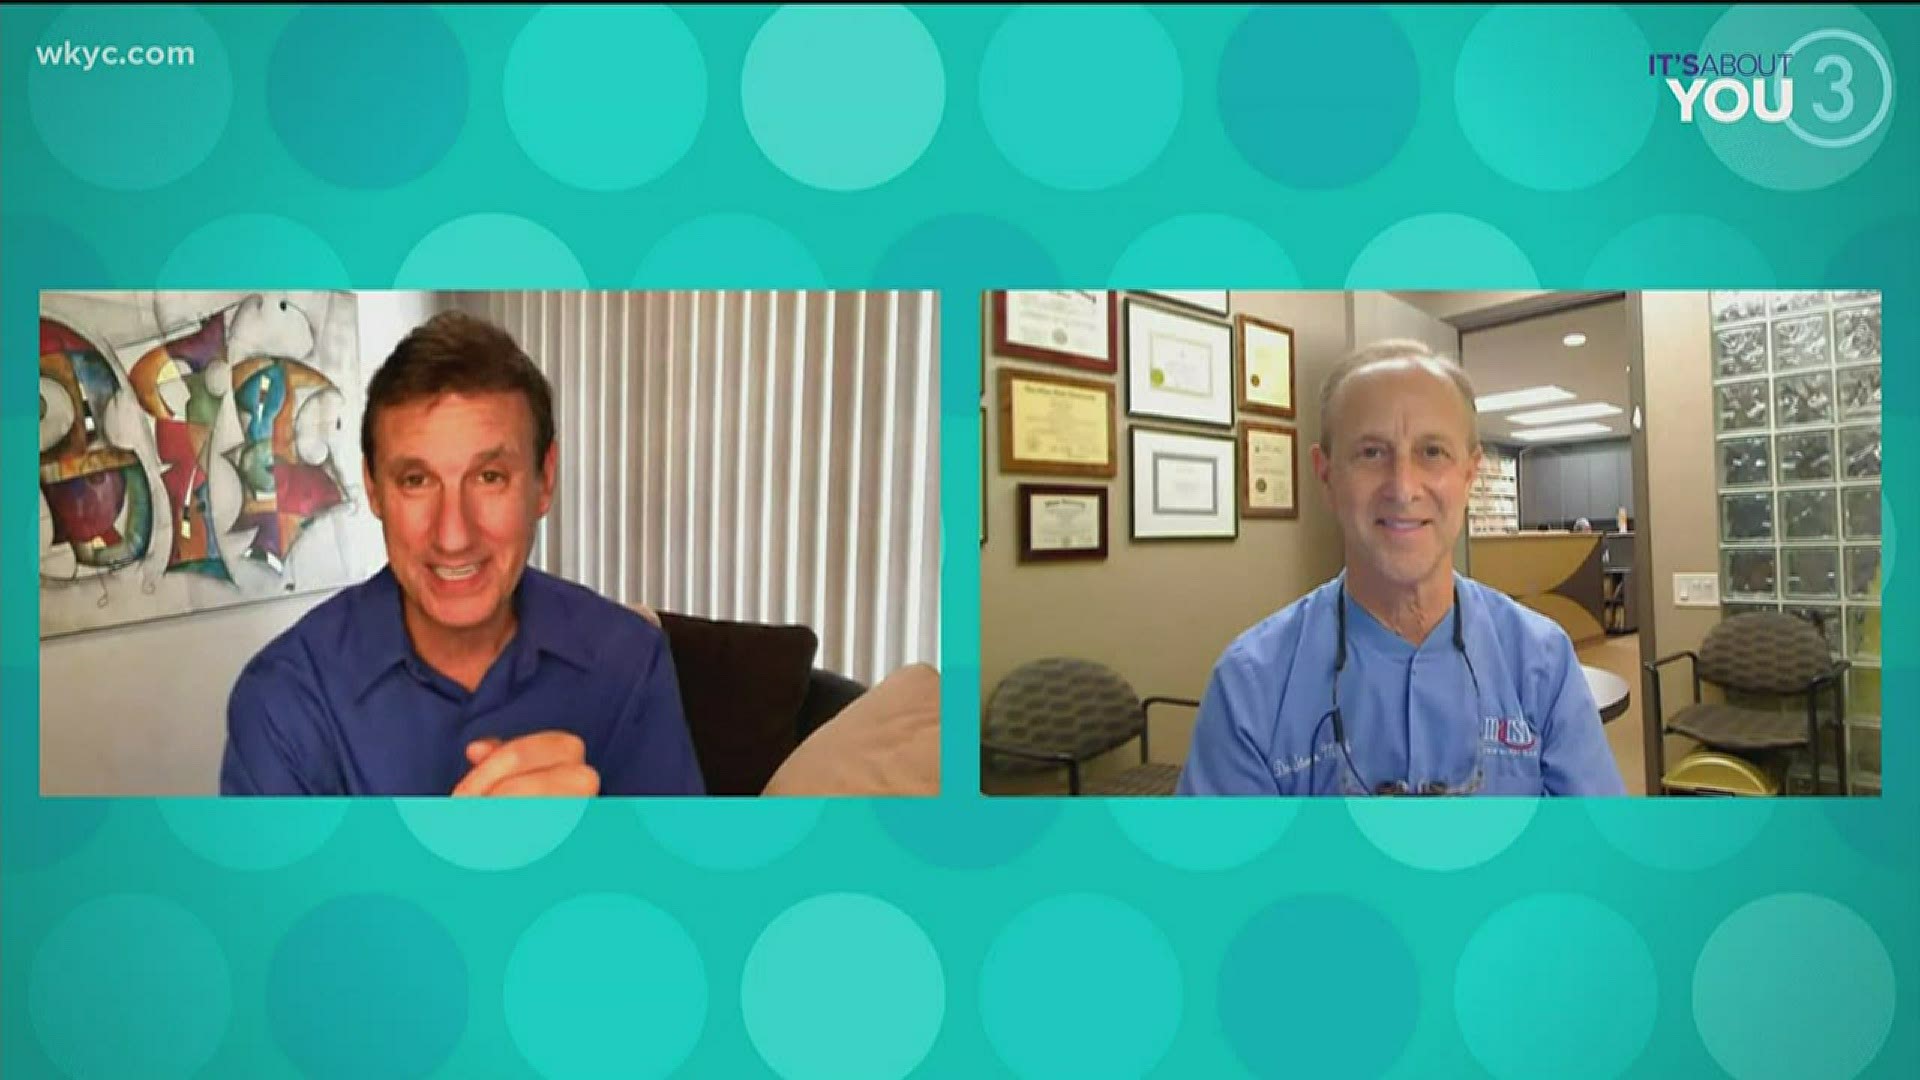 Joe sits down with "Dr. Transformation" Steve Marsh about their practice and how important a smile is to someone and how much dentistry can change your life.